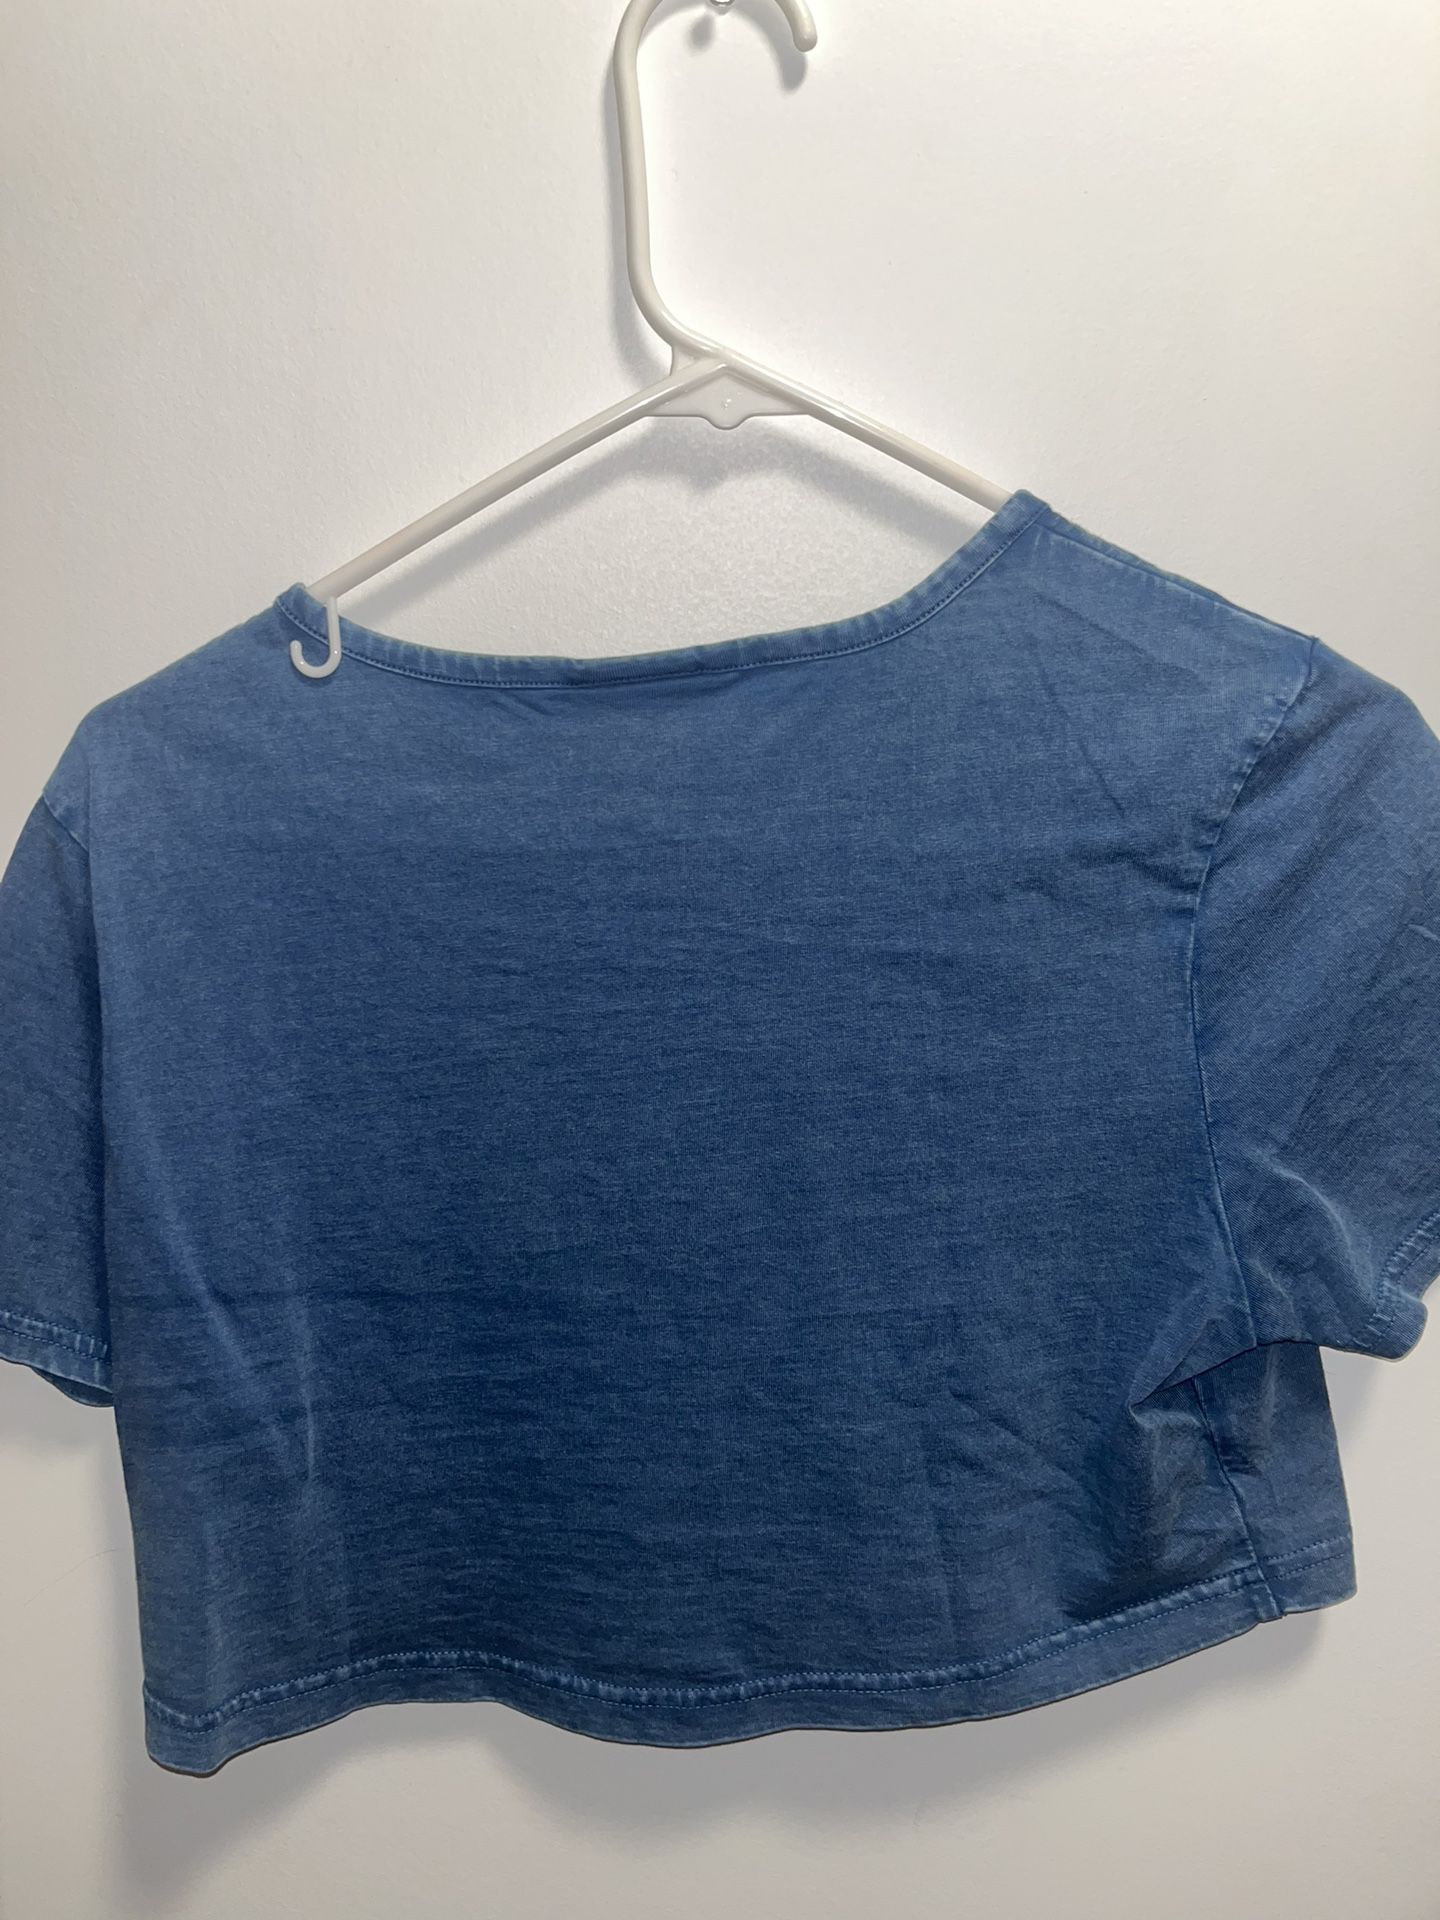 gymshark “ legacy washed” crop top for Sale in Tampa, FL - OfferUp